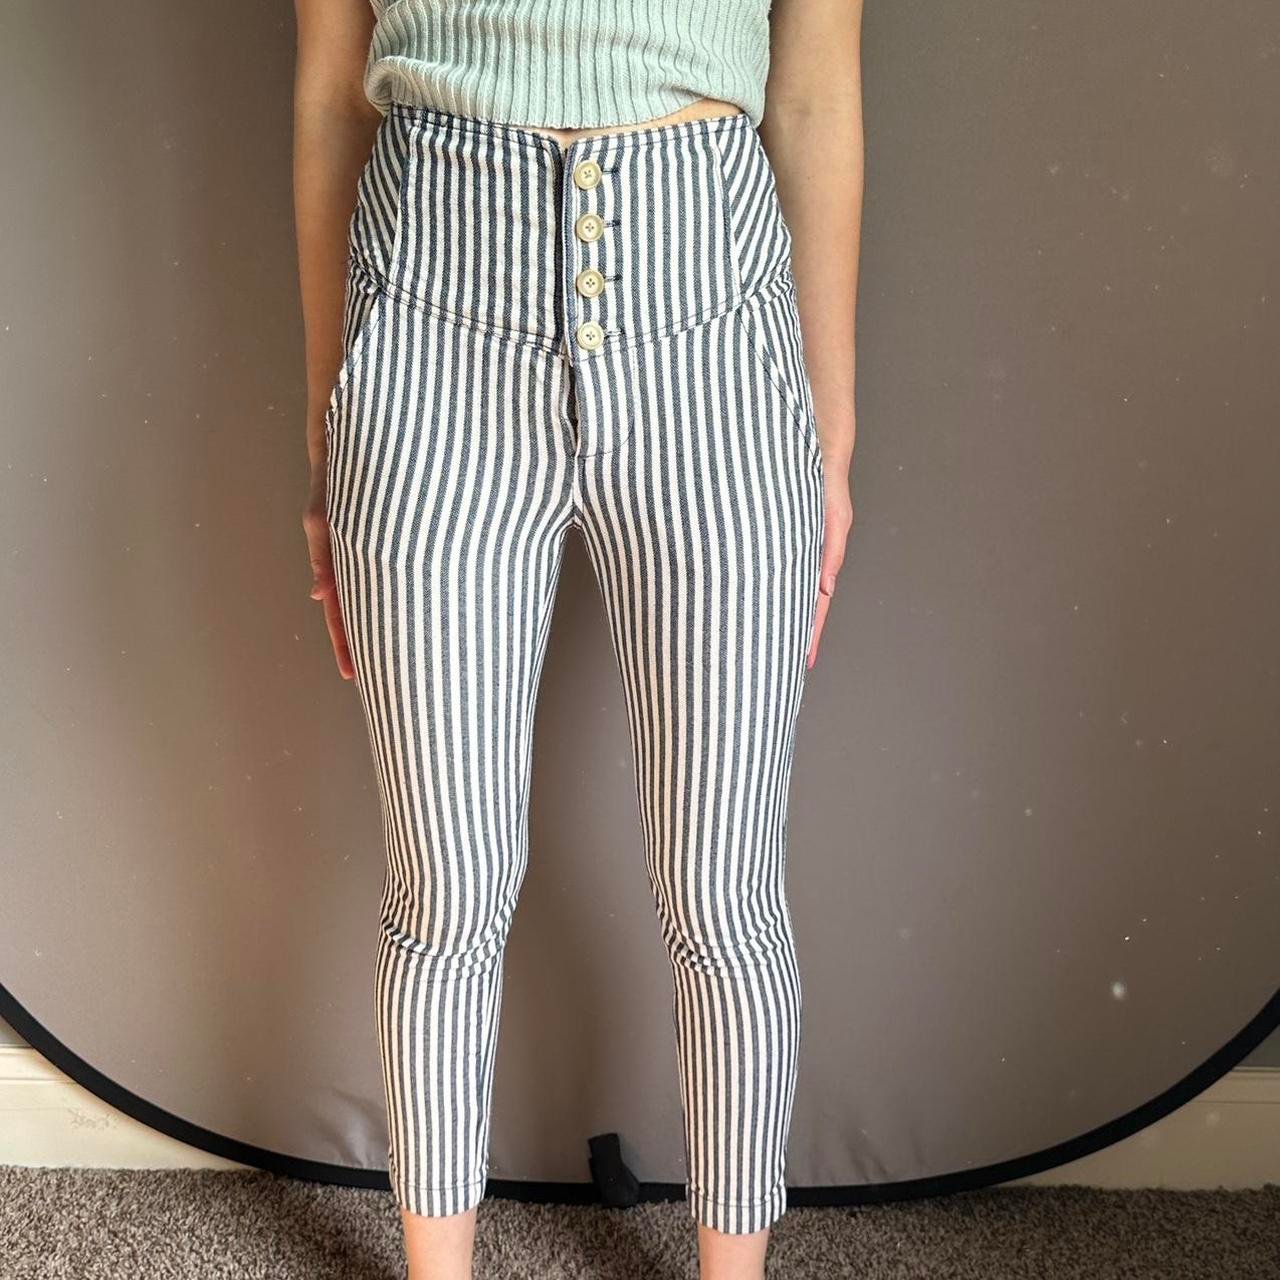 Authentic Free People Striped high-waist Pants fWuhs3H6